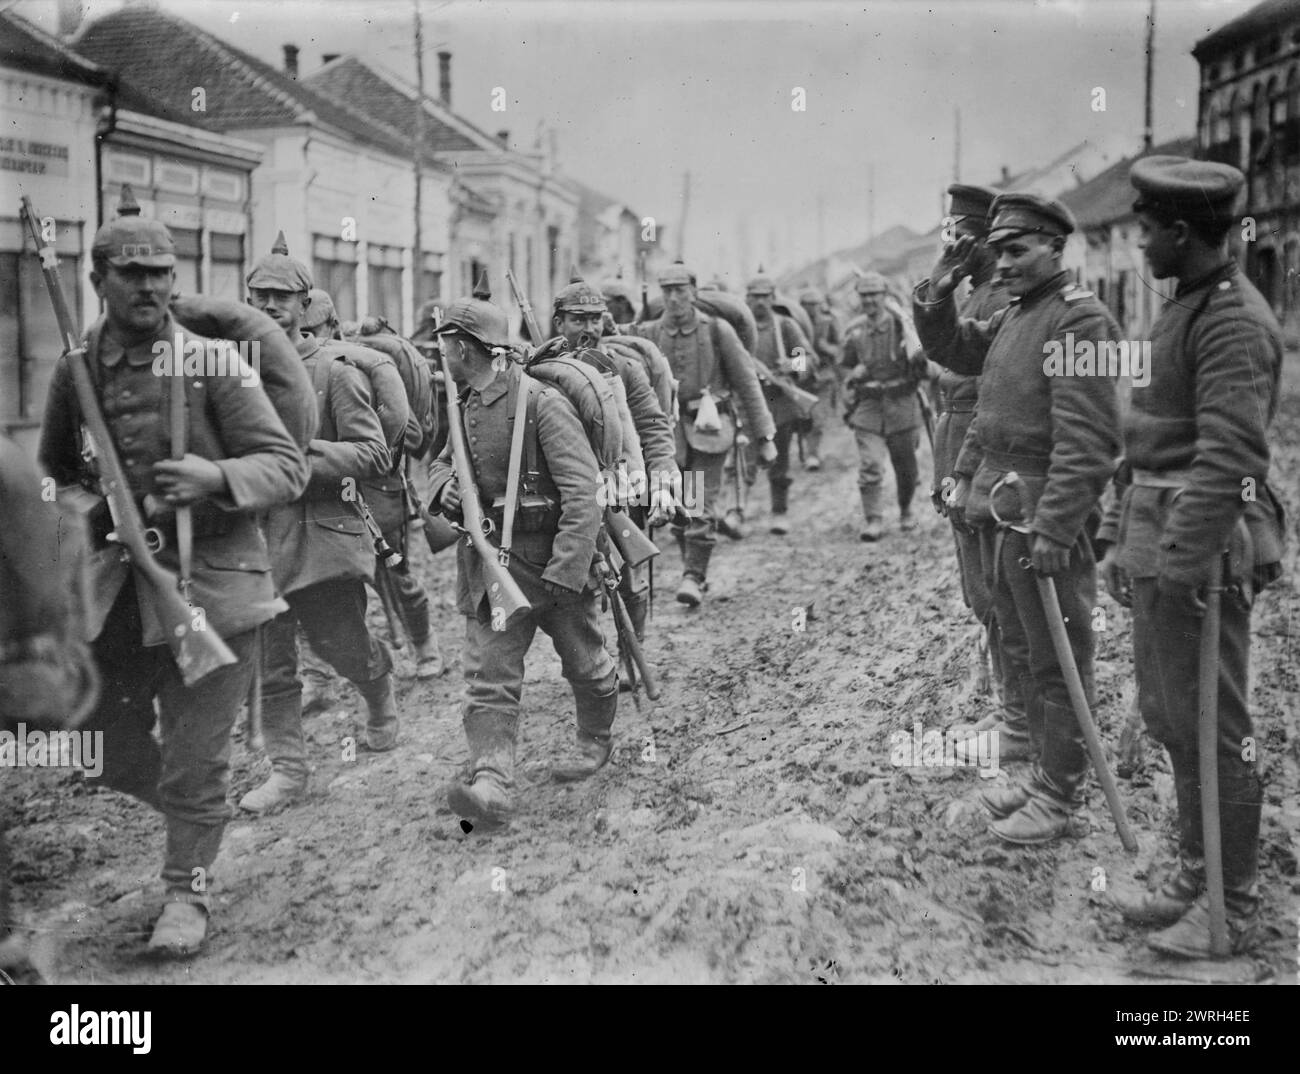 Germans passing thro' Paracin, on Belgrad - Nisch Line, between c1910 and c1920. German soldiers marching through the Serbian town of Paracin during World War I. Stock Photo